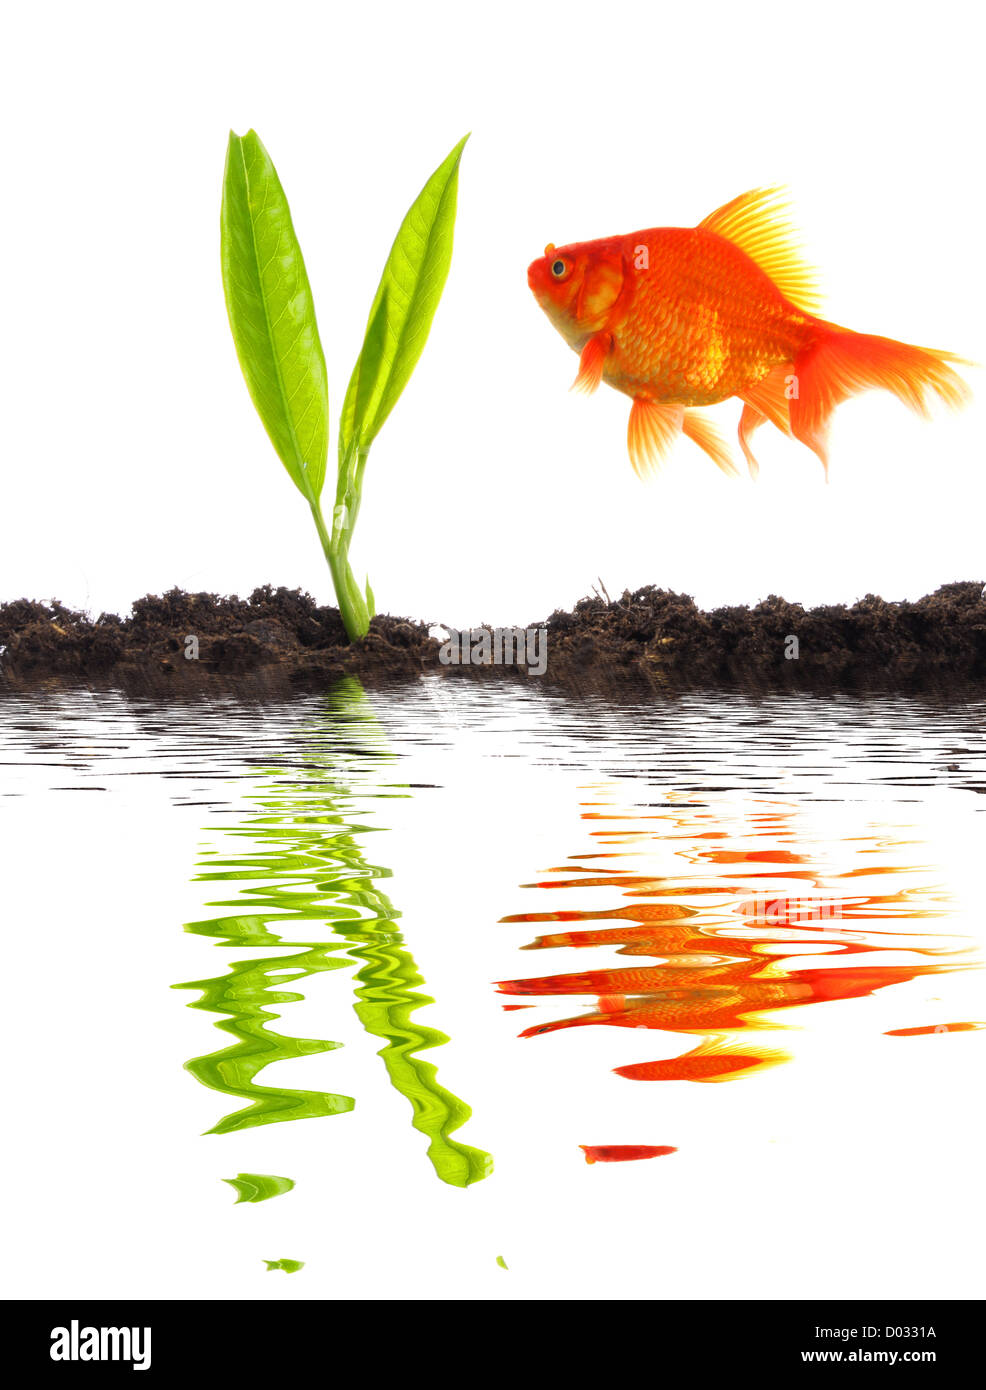 young plant goldfish and soil with water reflection showing growth and success Stock Photo